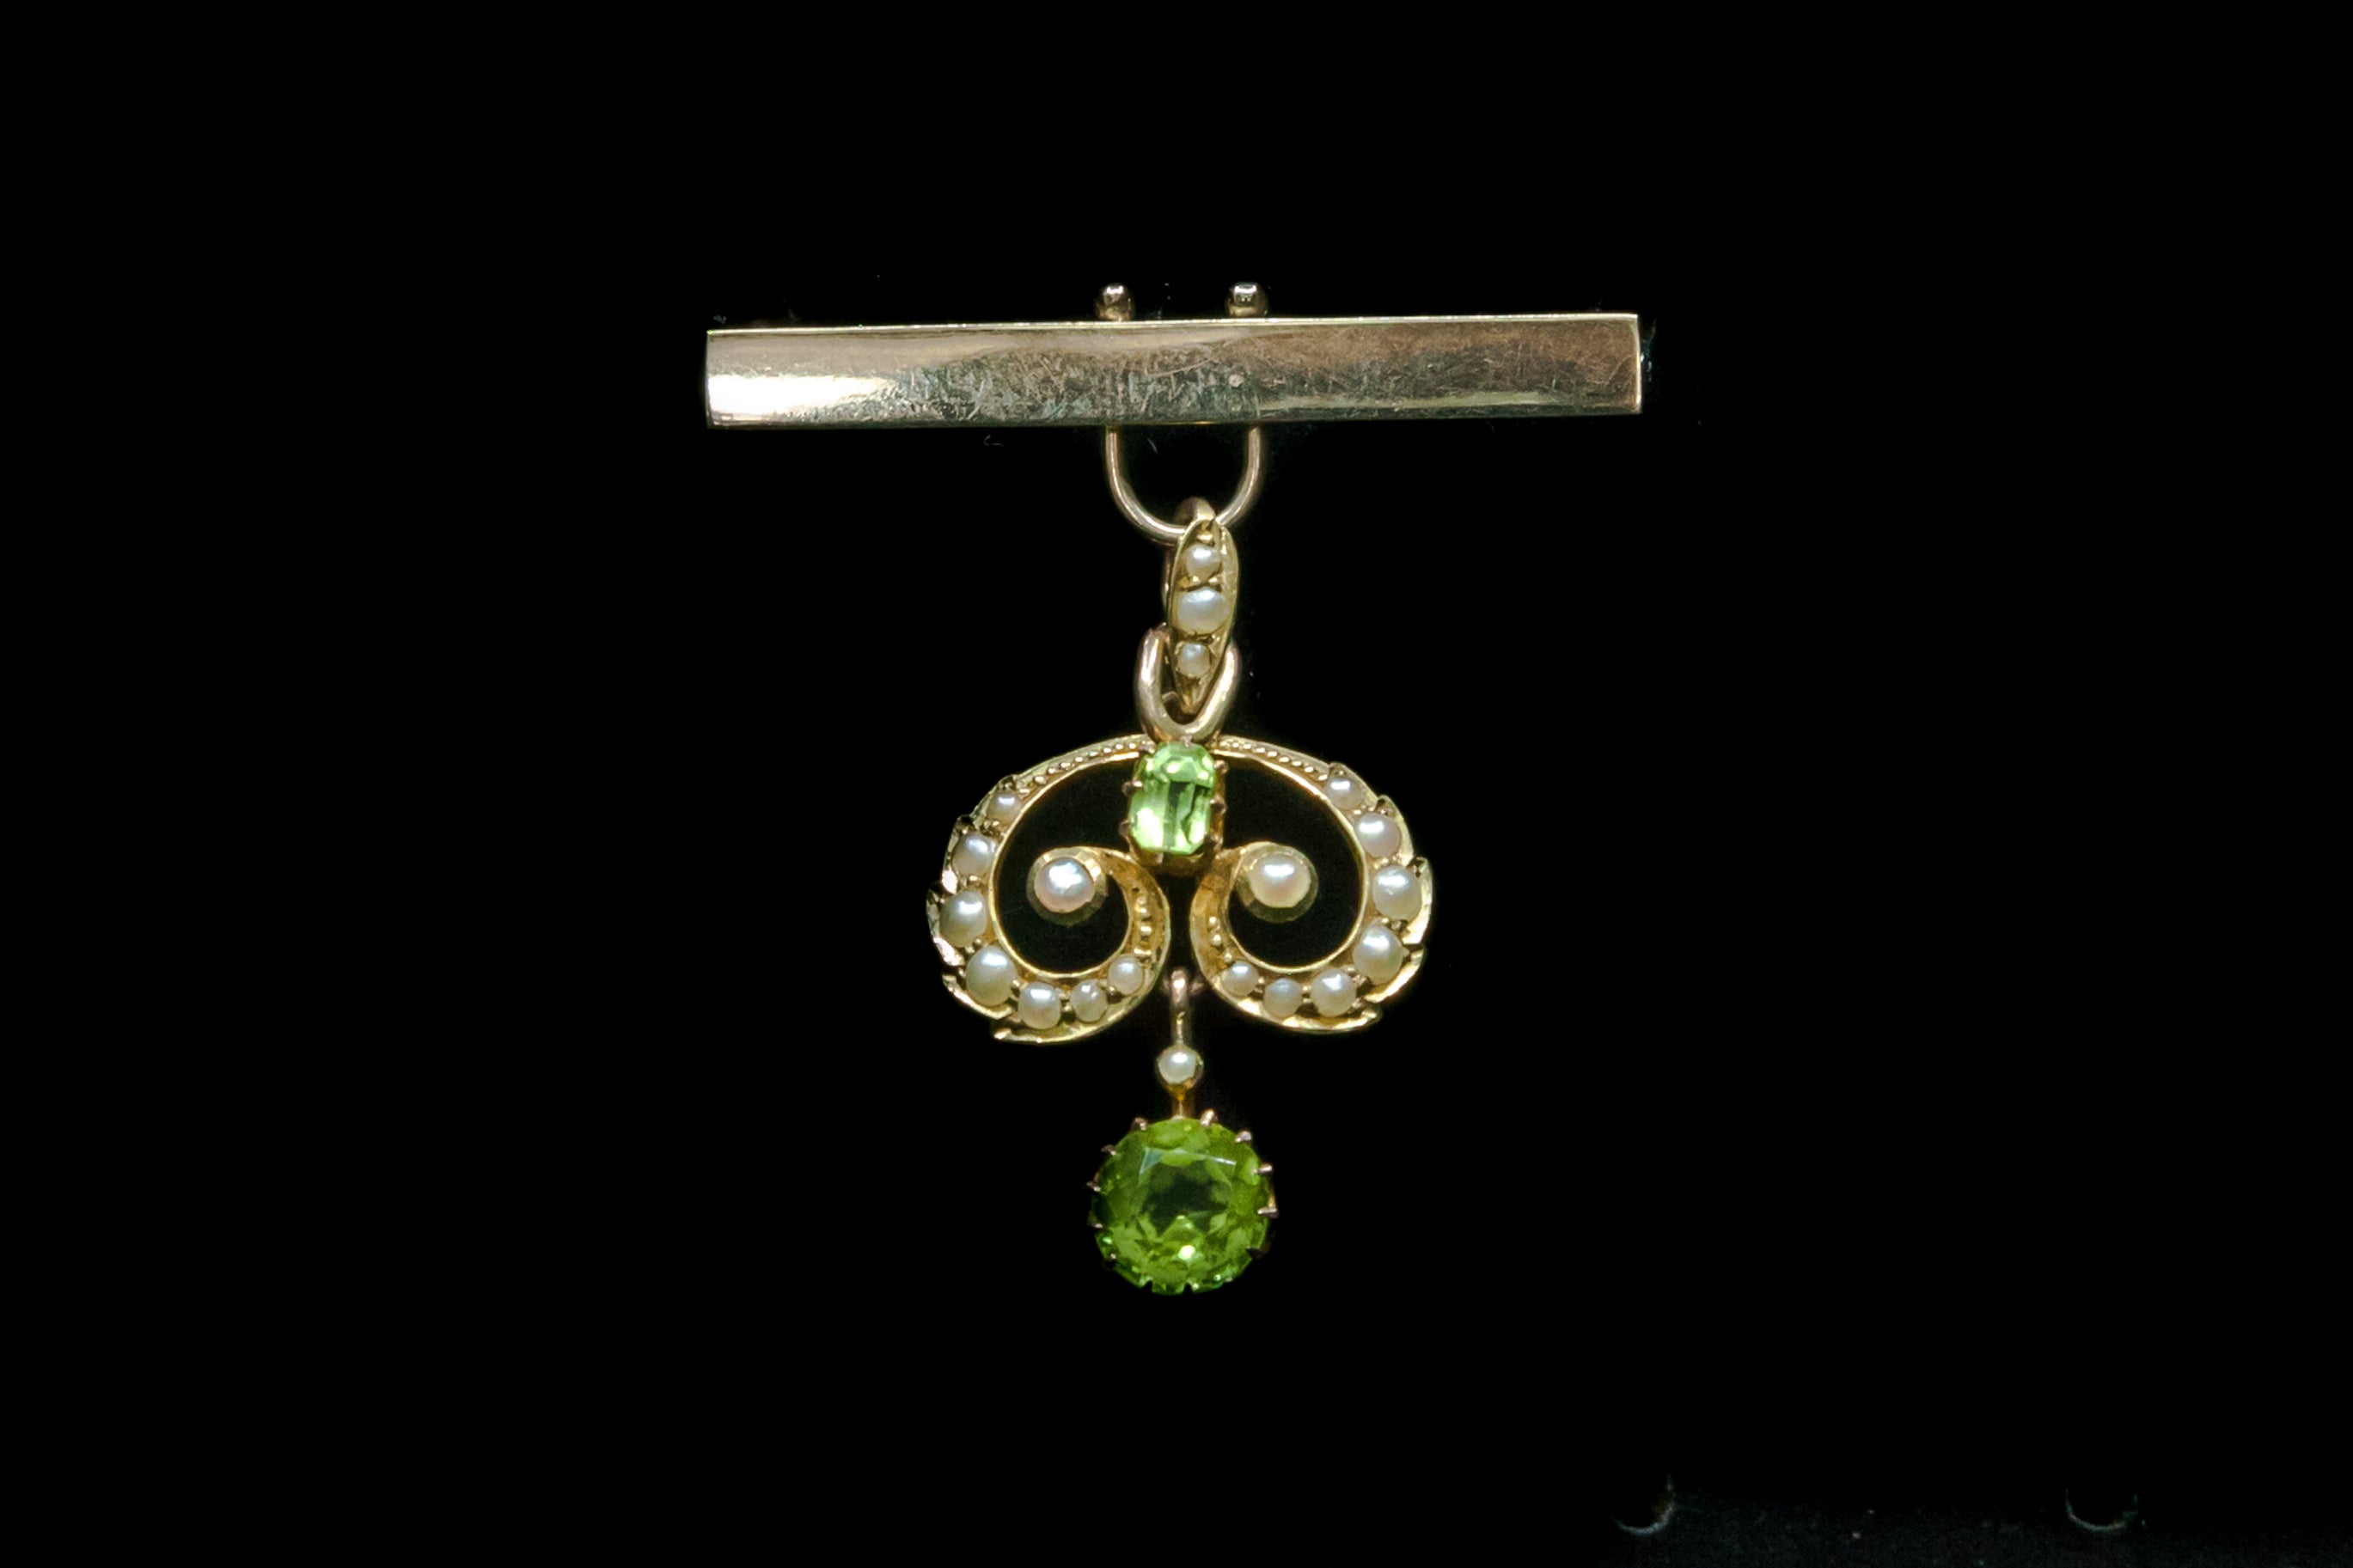 Edwardian 9ct Gold, Seed Pearl and Tourmaline Brooch.